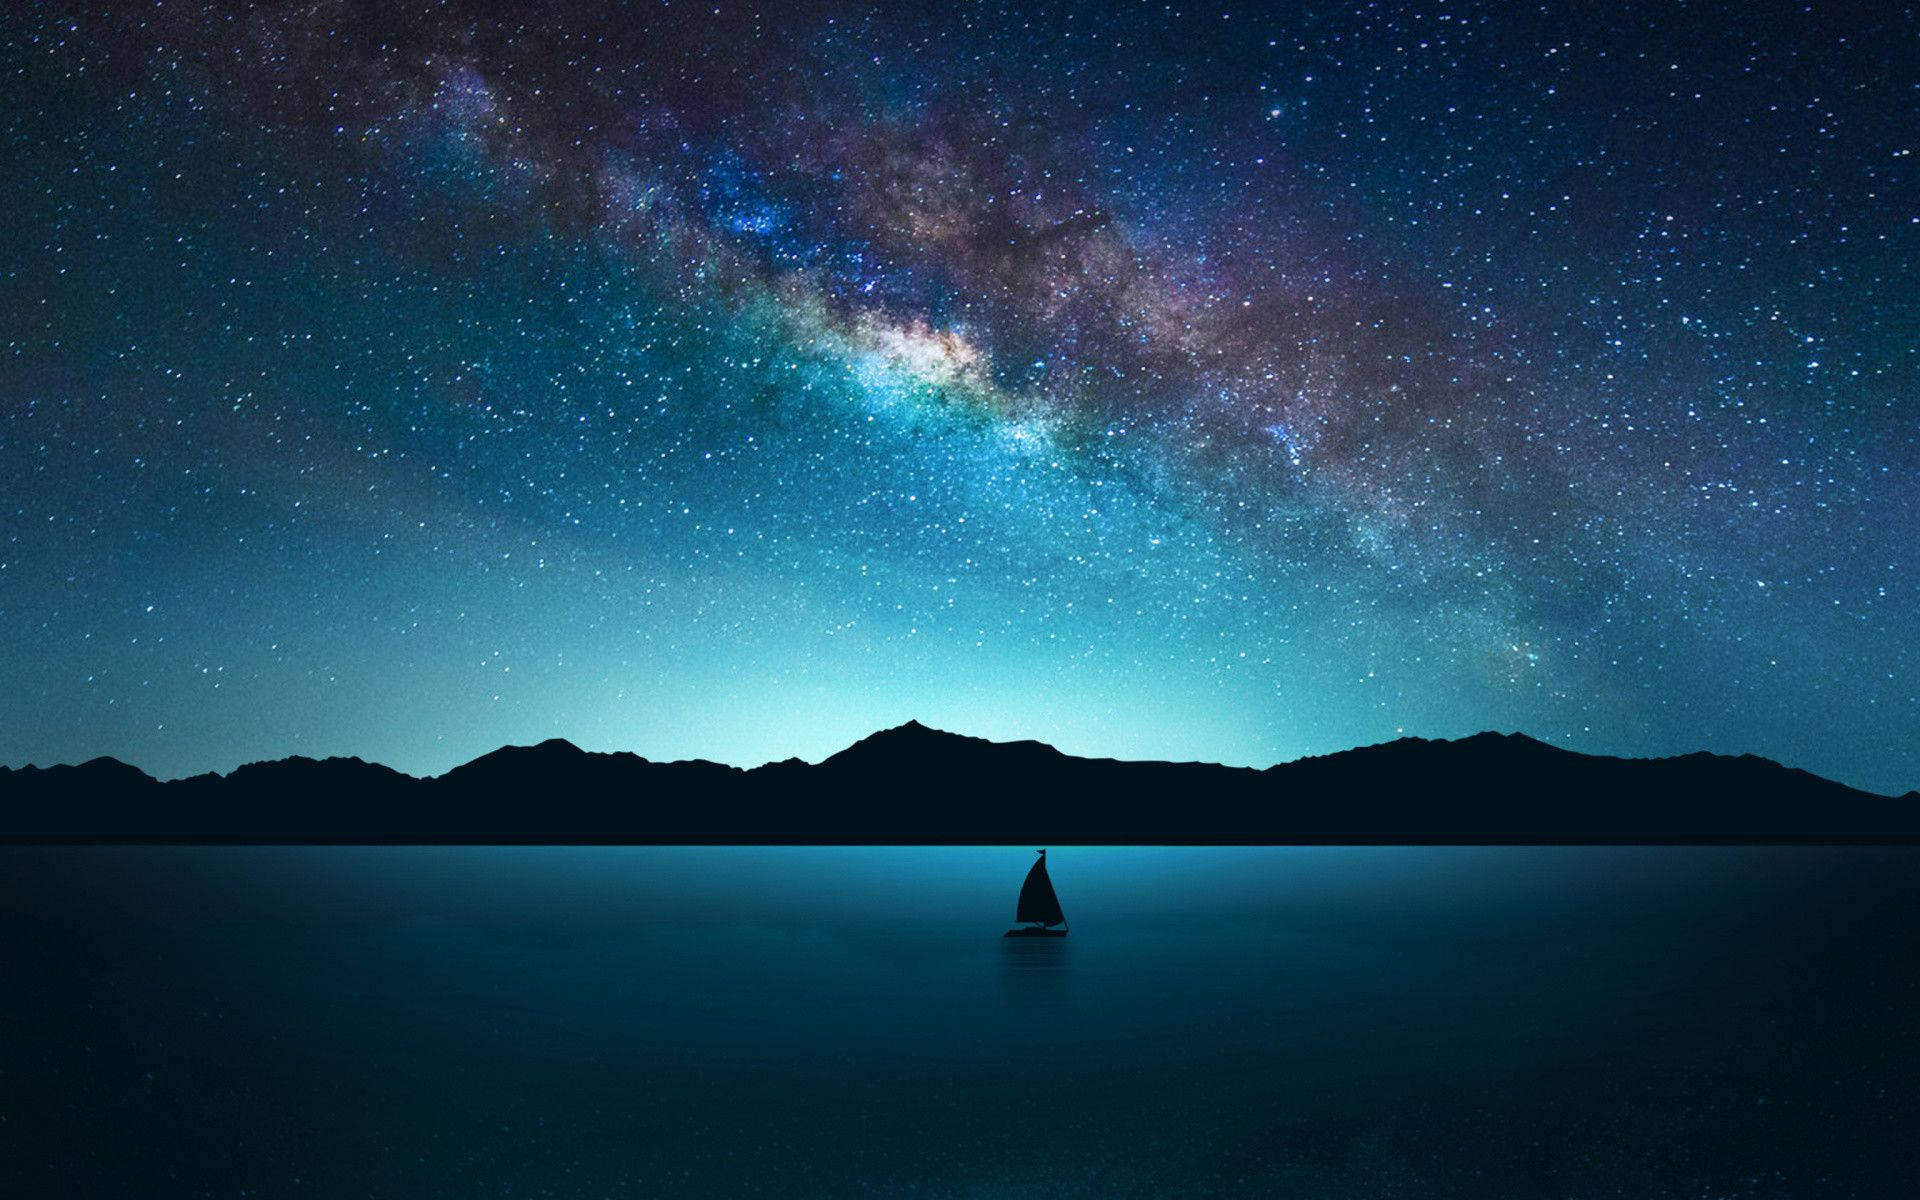 A peaceful night sky, filled with exquisite stars Wallpaper